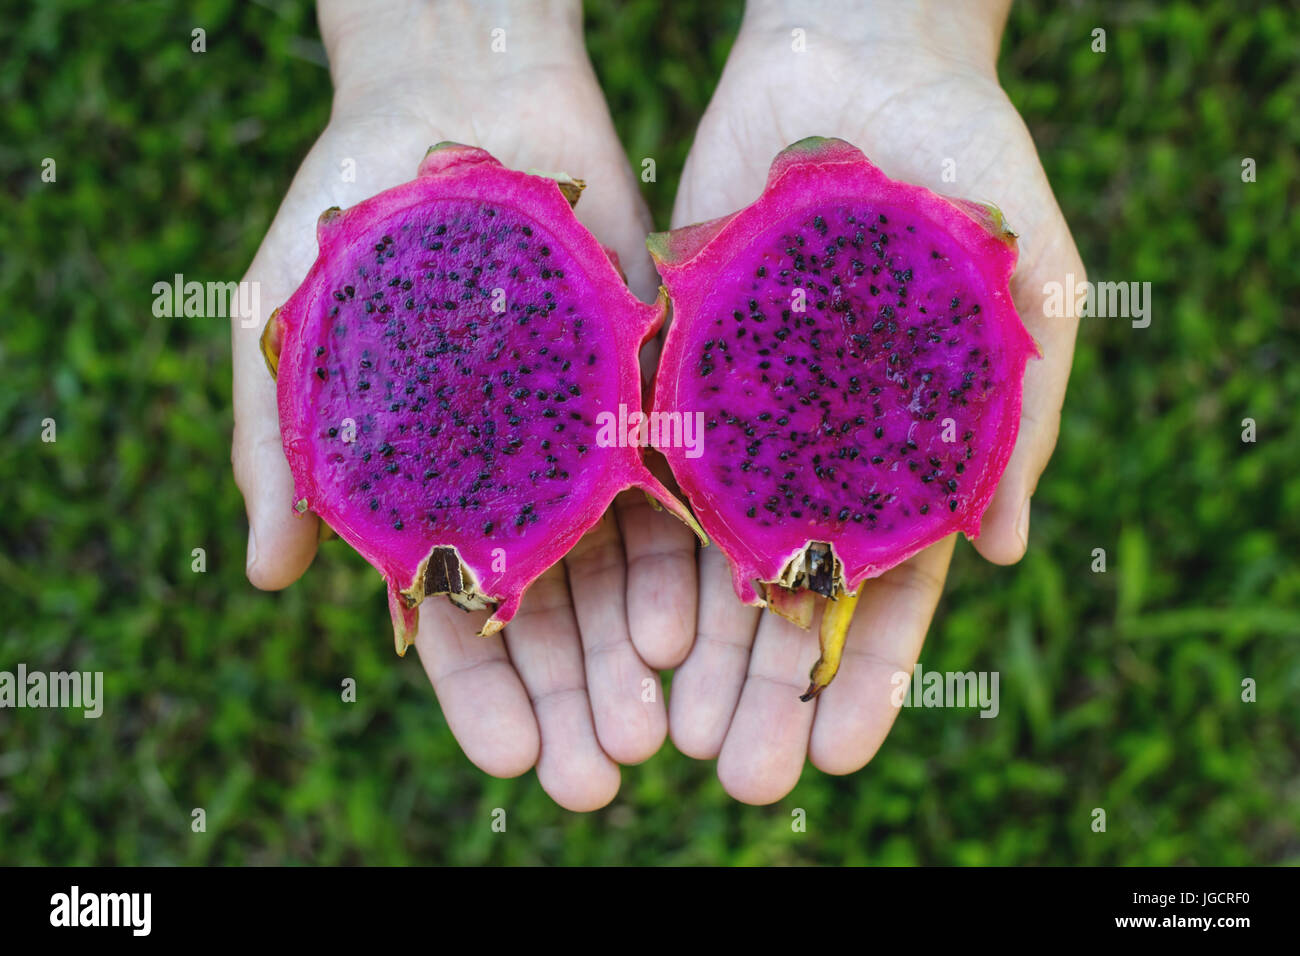 Woman's hand holding dragon fruit in her hands Stock Photo